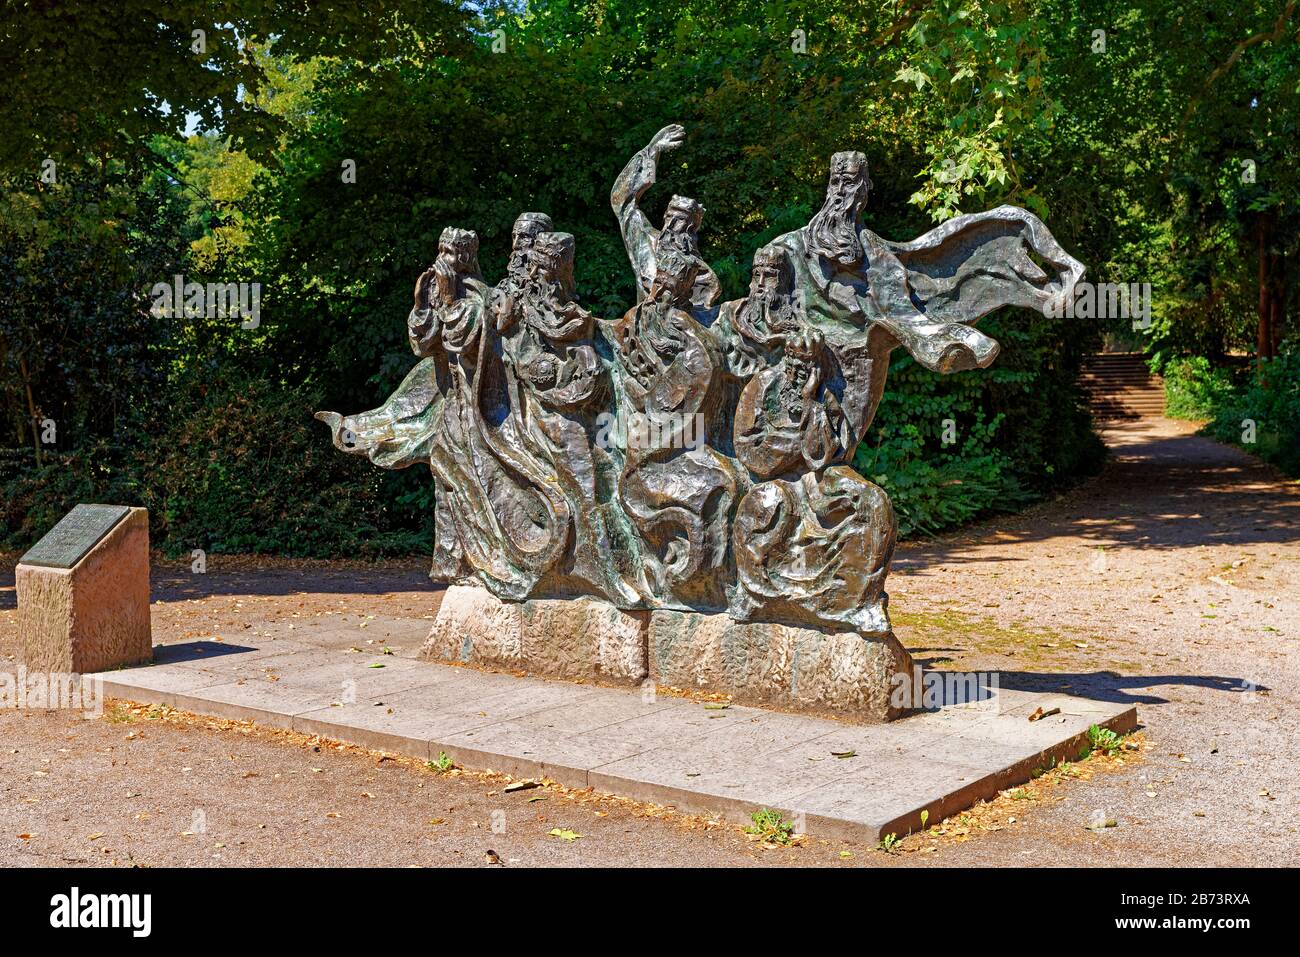 Germany, Rhineland-Palatinate, Speyer, cathedral place, SchUM town, cathedral garden, bronze figure, ferryman get, plants, trees, places, architecture Stock Photo